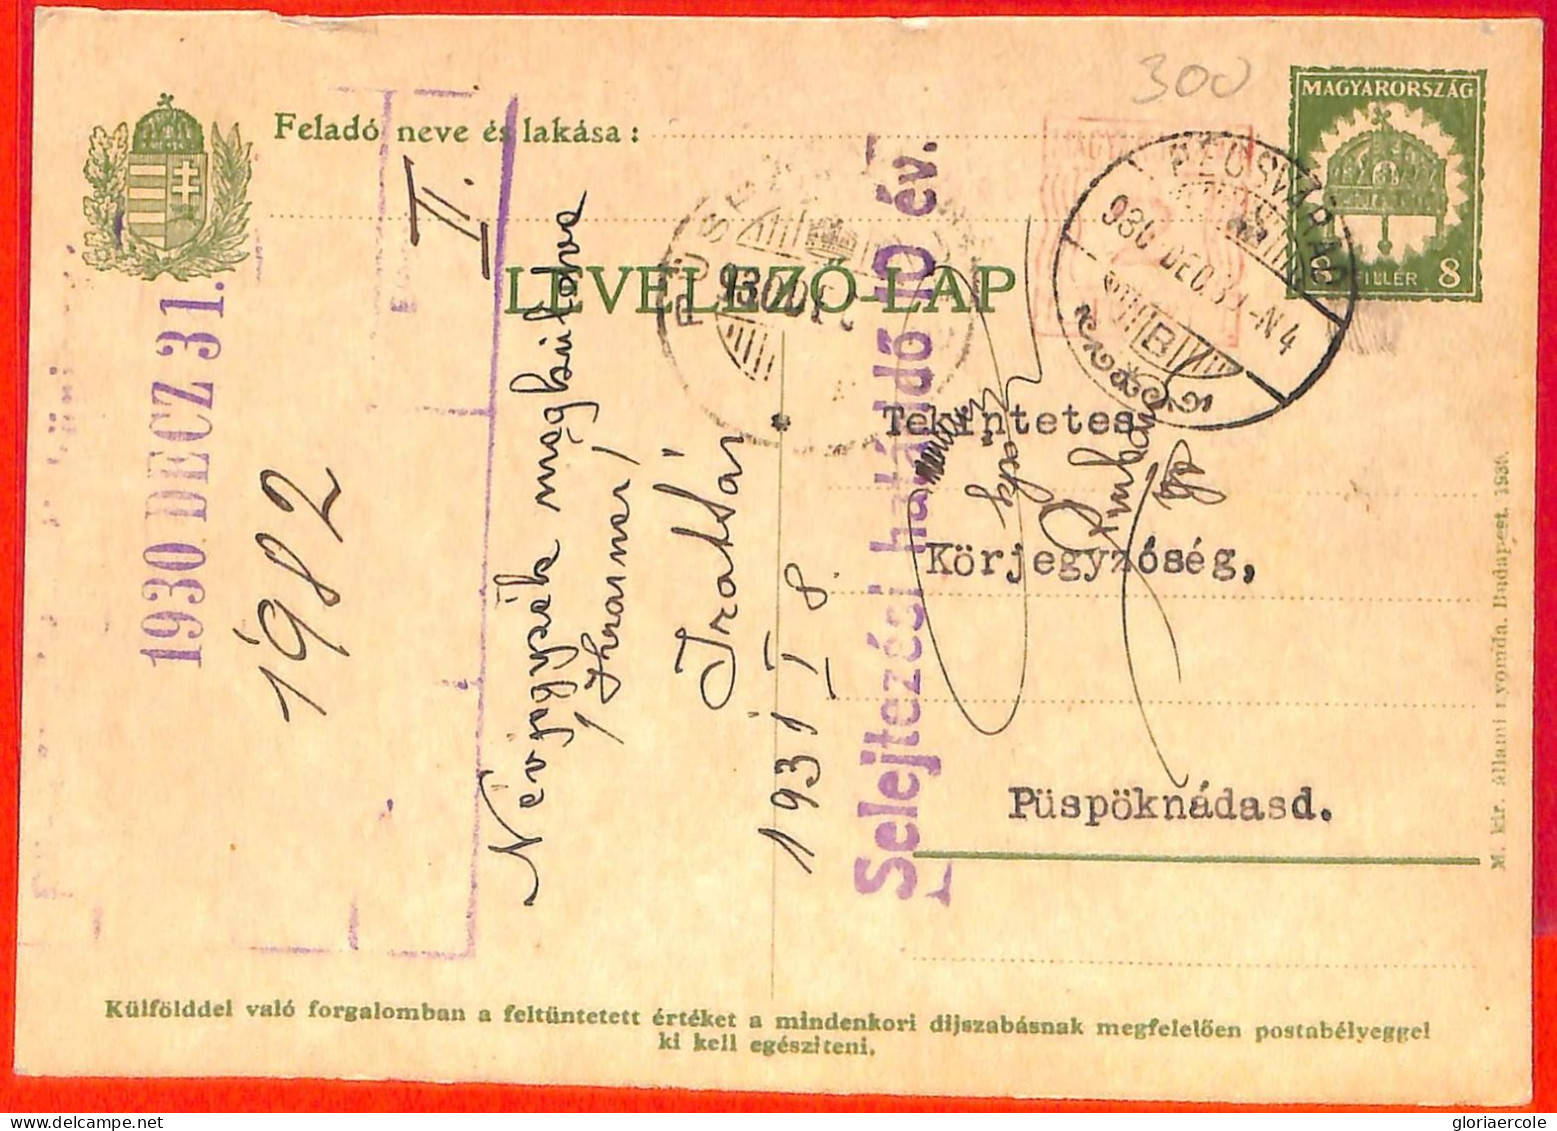 Aa1976 - HUNGARY - Postal History - STATIONERY CARD Added Mechanical Franking 1930 - Service